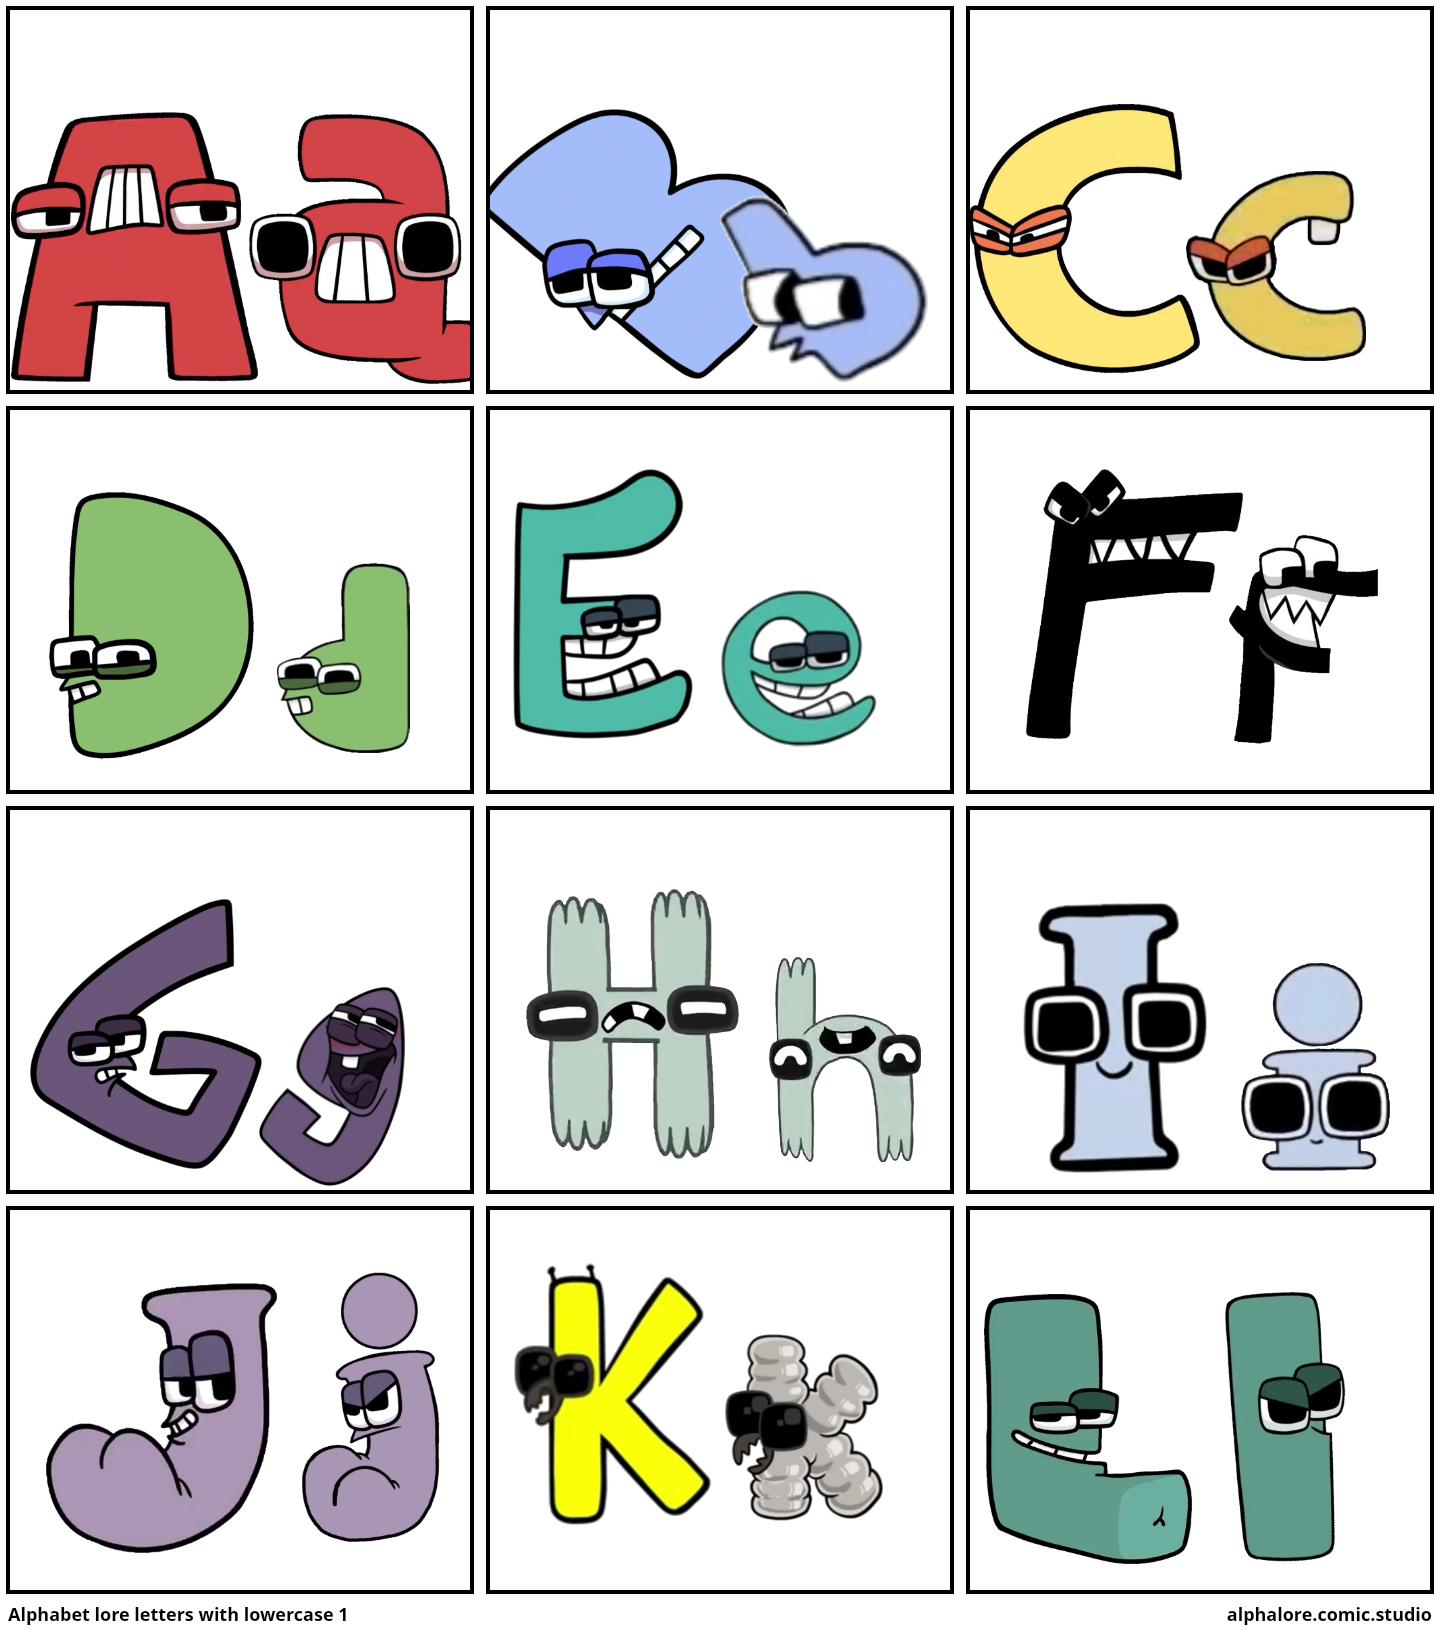 Alphabet lore letters with lowercase 1